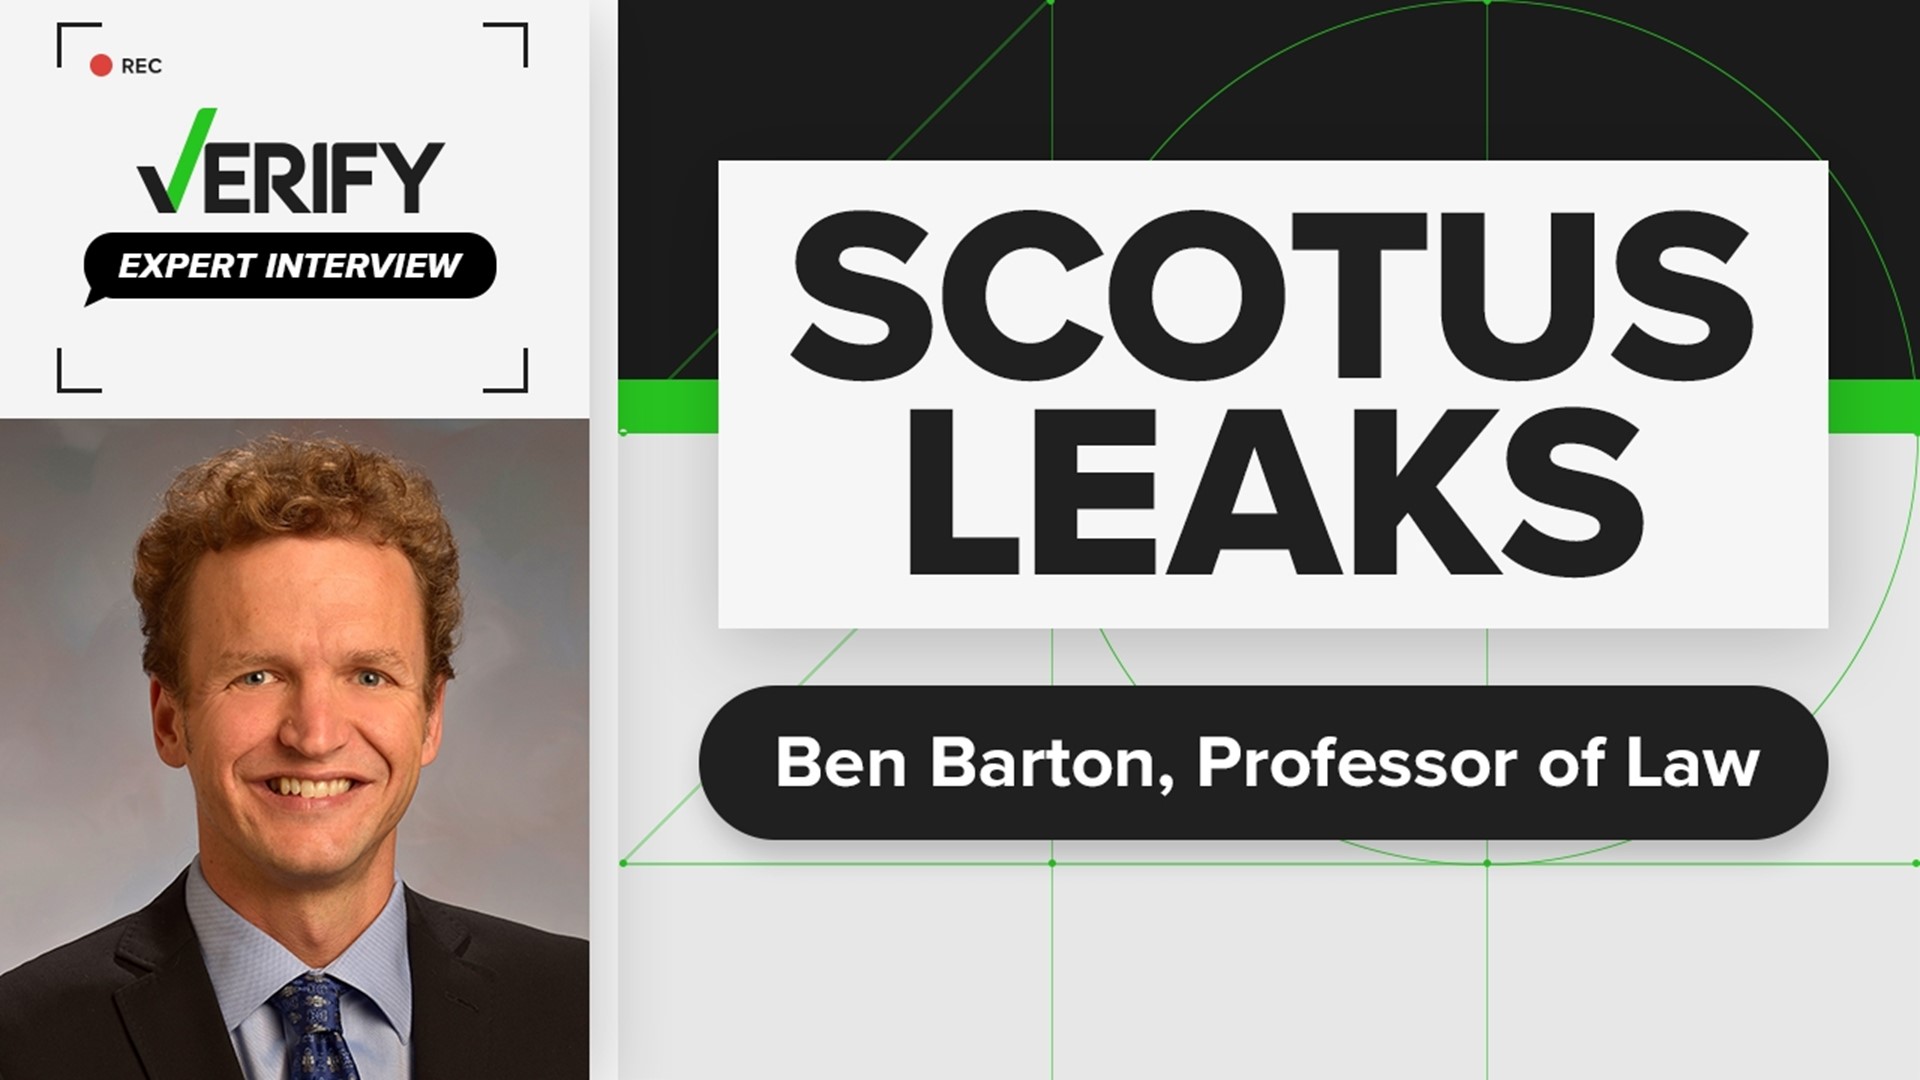 While Supreme Court leaks are rare, they have happened, but they were of decisions — never the full text of a draft opinion. We spoke to Ben Barton for more context.